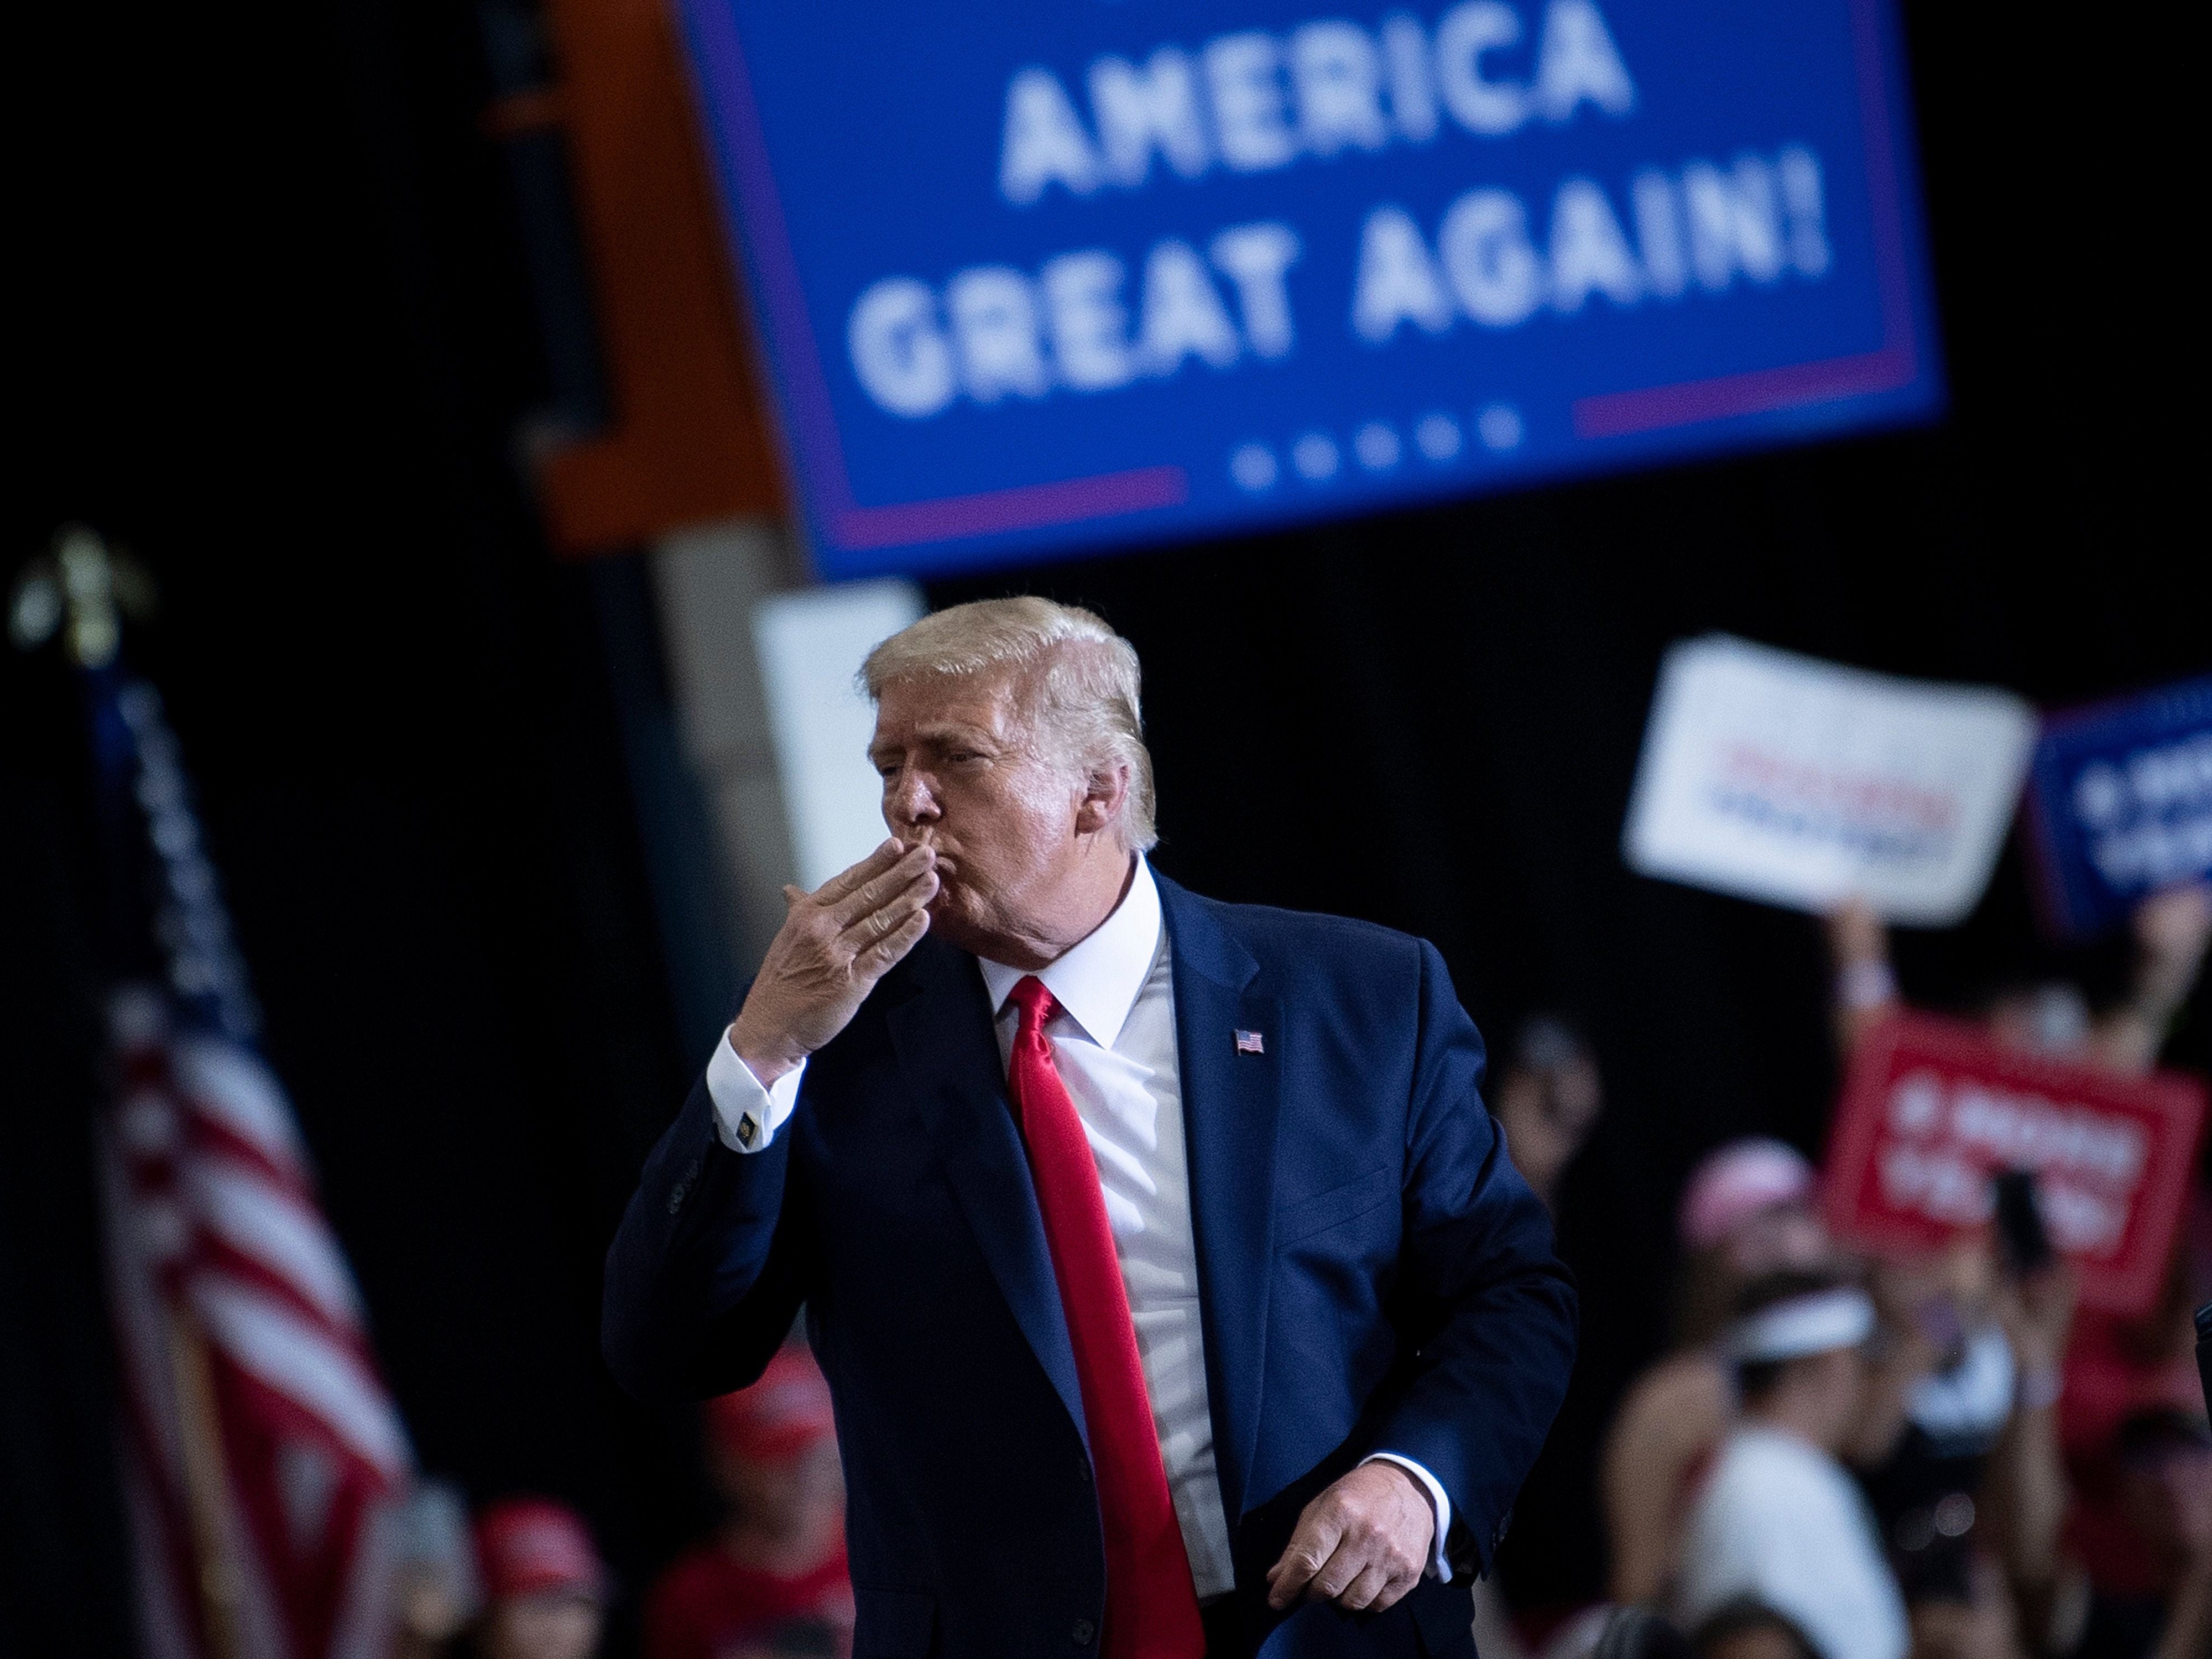 US President Donald Trump blows a kiss to supporters after speaking during an indoor campaign rally at Xtreme Manufacturing in Henderson, a suburb of Las Vegas, Nevada